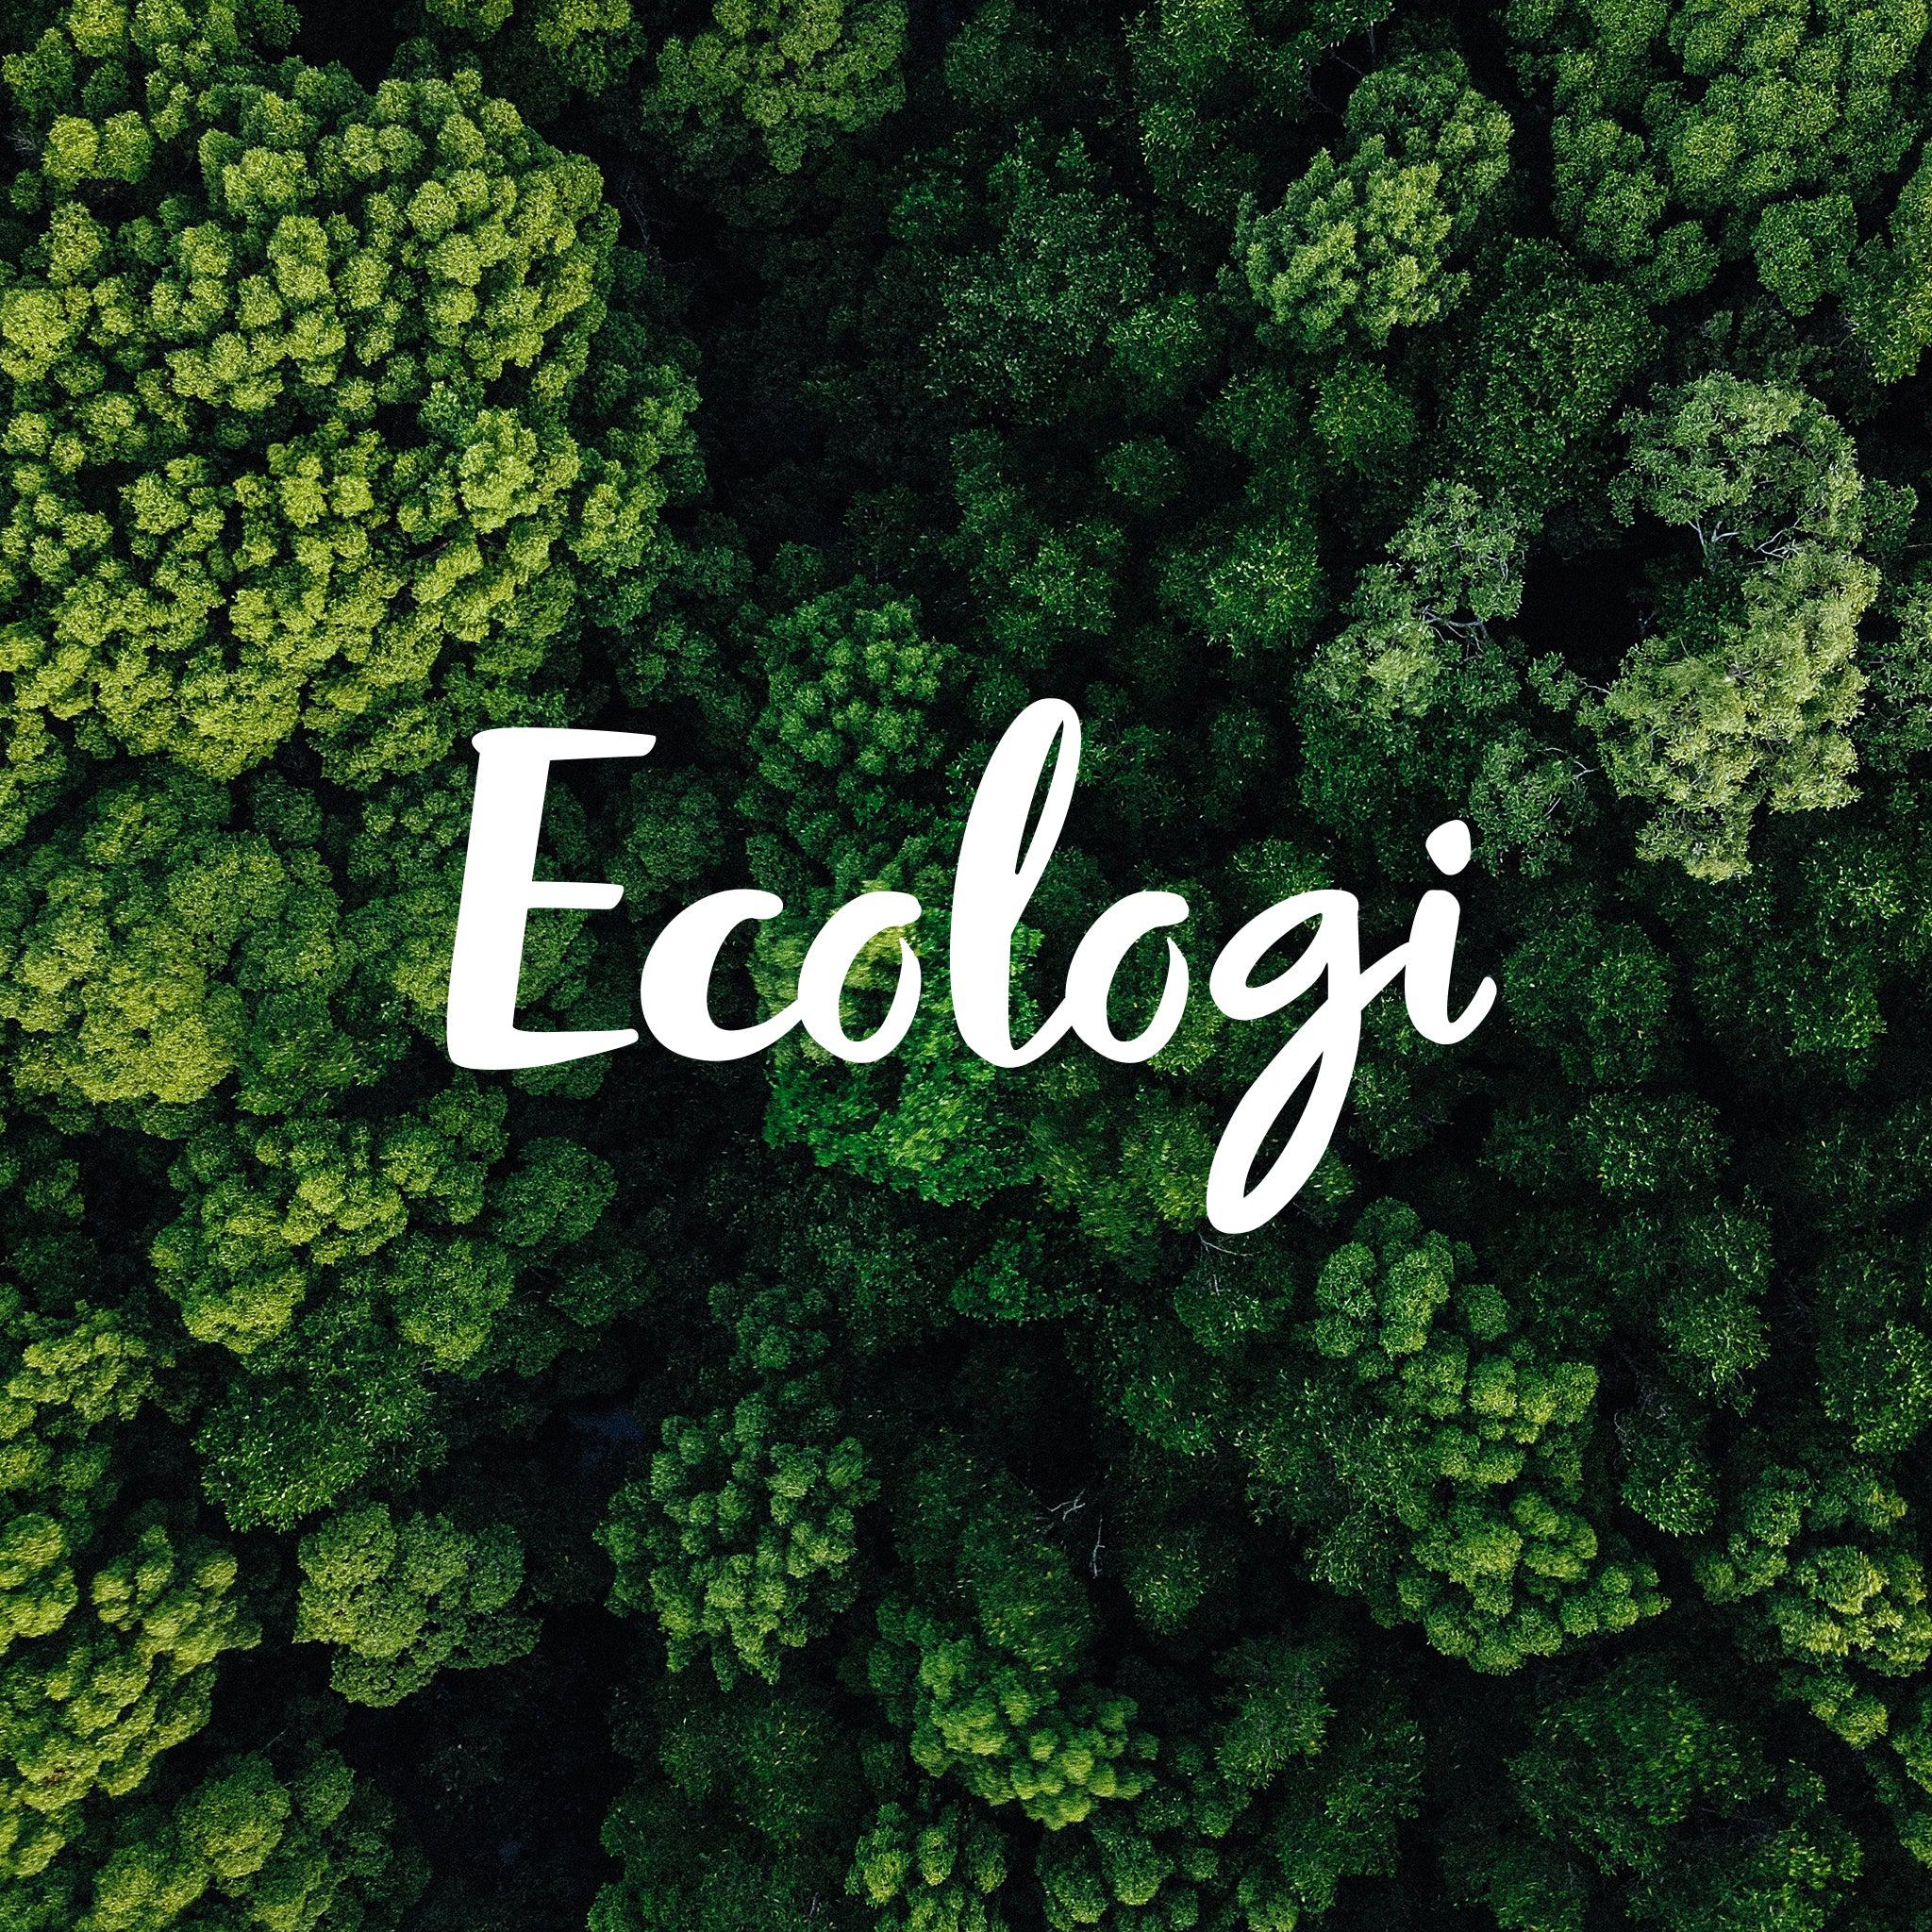 ECOLOGI X IMPERFECT POINTES. We are proudly the tree hugging type and so, for every Imperfect Pointes order, Ecologi will plant one tree to help support responsible Tree Planting efforts around the globe.